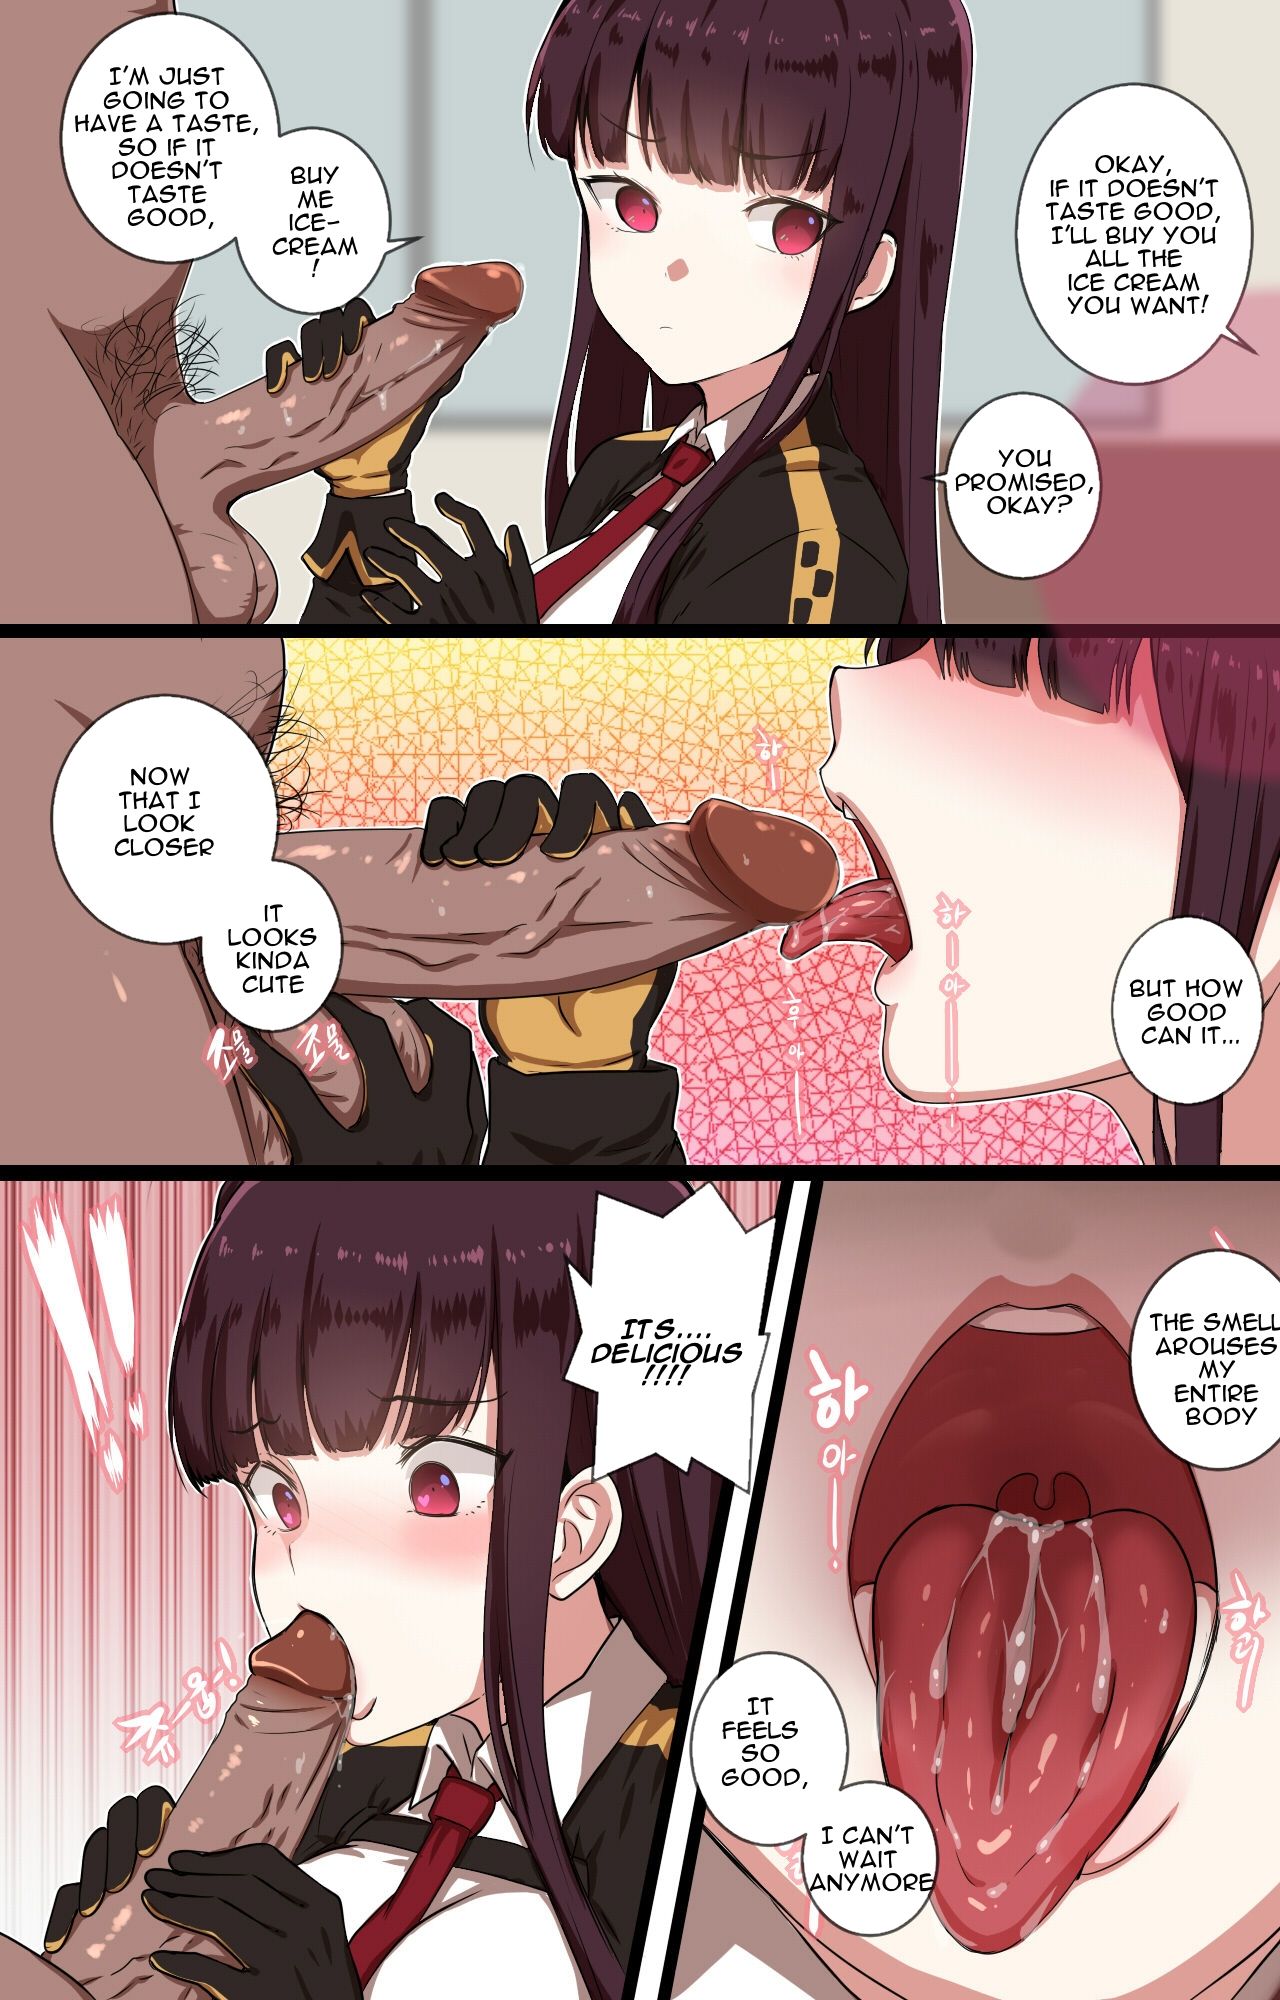 [yun-uyeon (ooyun)] How to use dolls 02 (Girls Frontline) [English] page 6 full